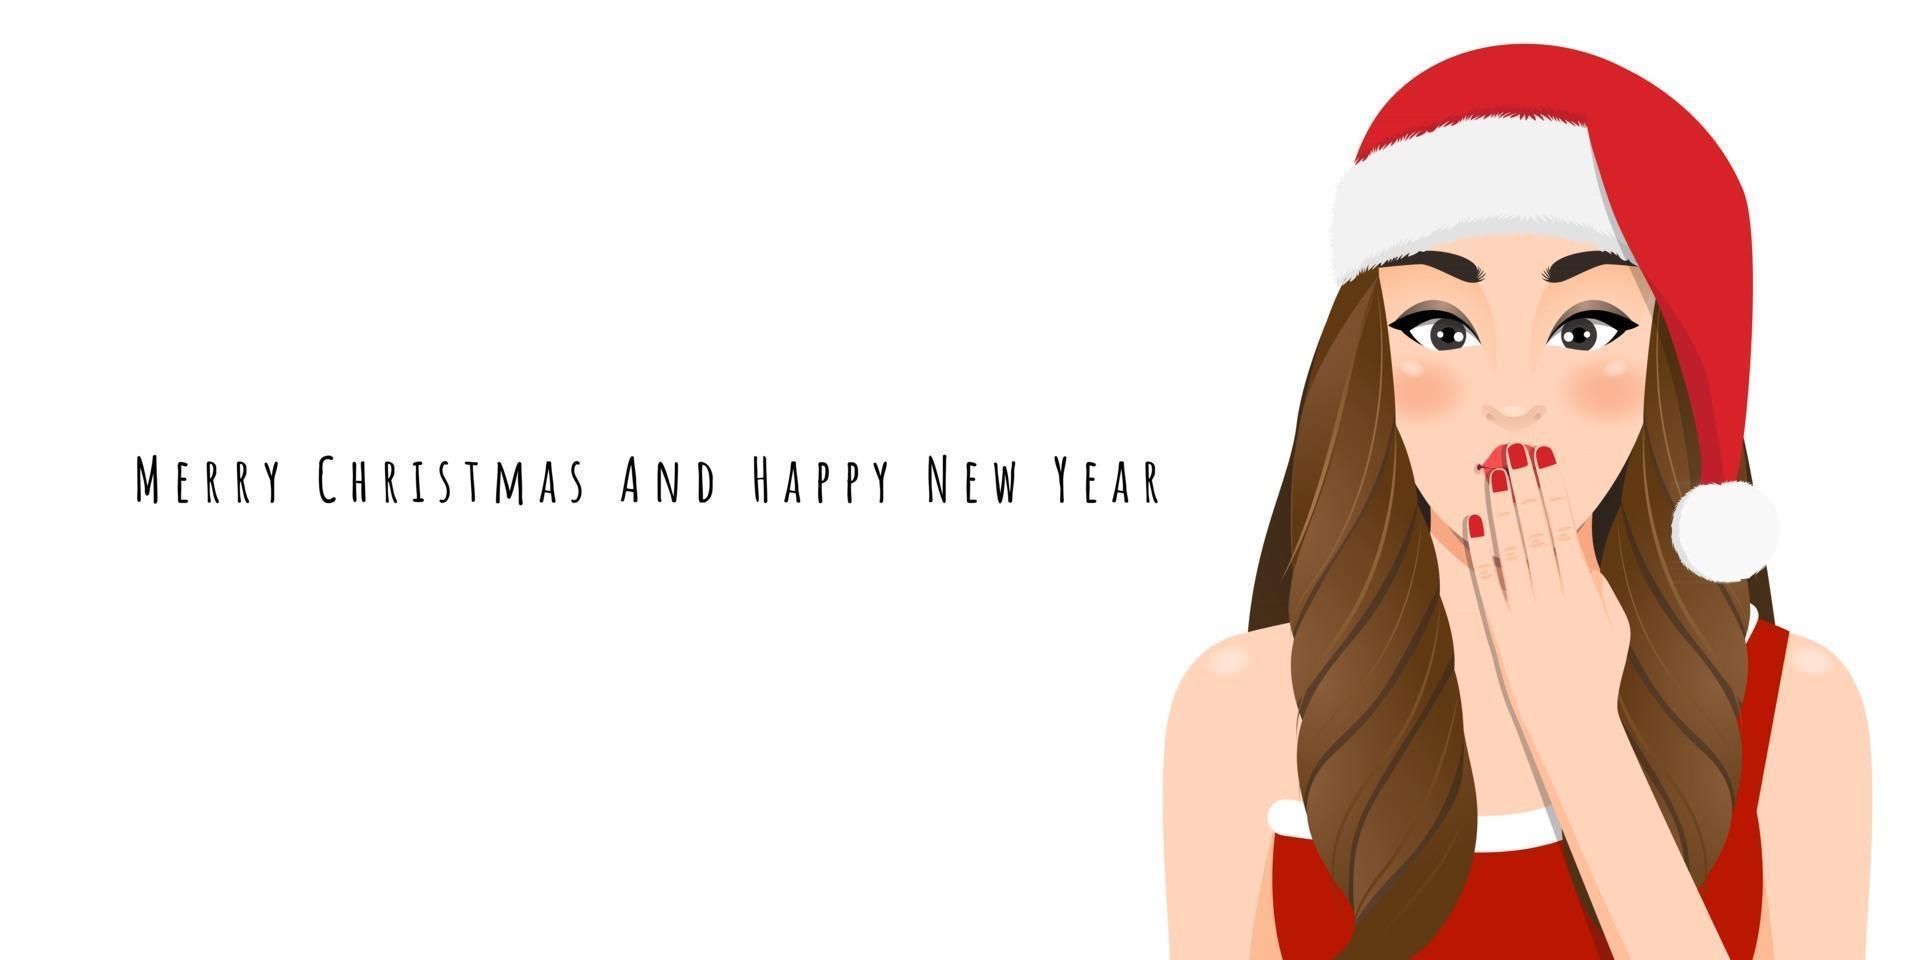 Excited Christmas girl in red dress and christmas santa hat with Happy new year and Merry Christmas festival cartoon character on the white background vector illustration